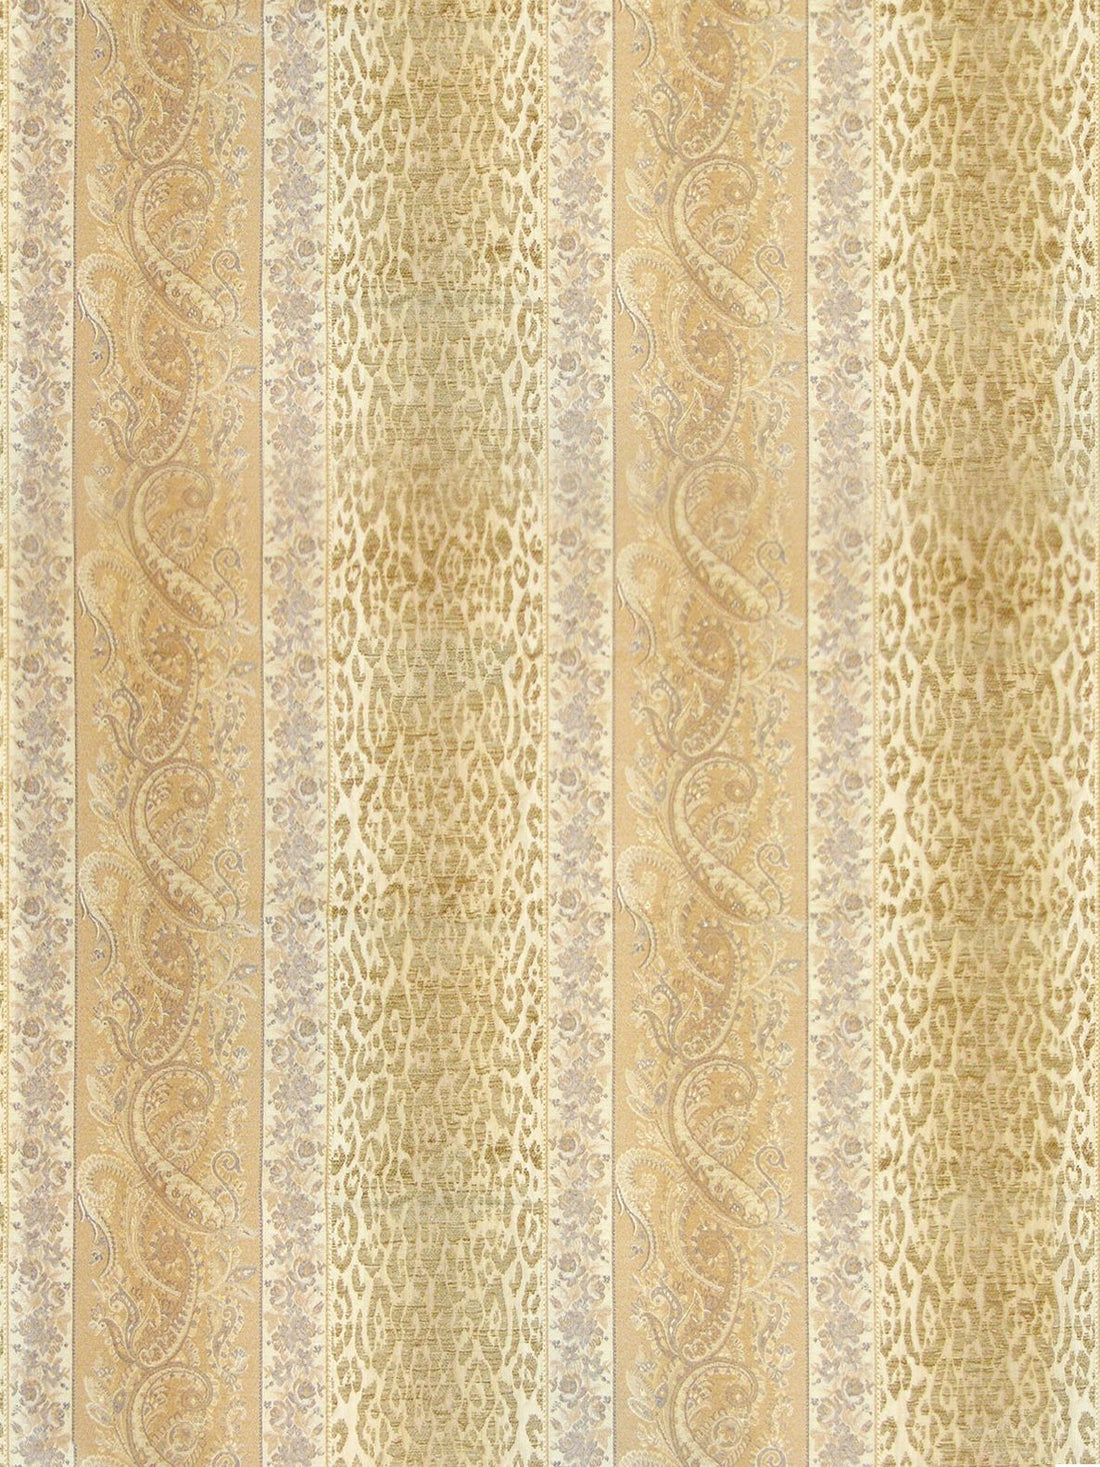 Tanzania fabric in topaz color - pattern number FR 00017516 - by Scalamandre in the Old World Weavers collection